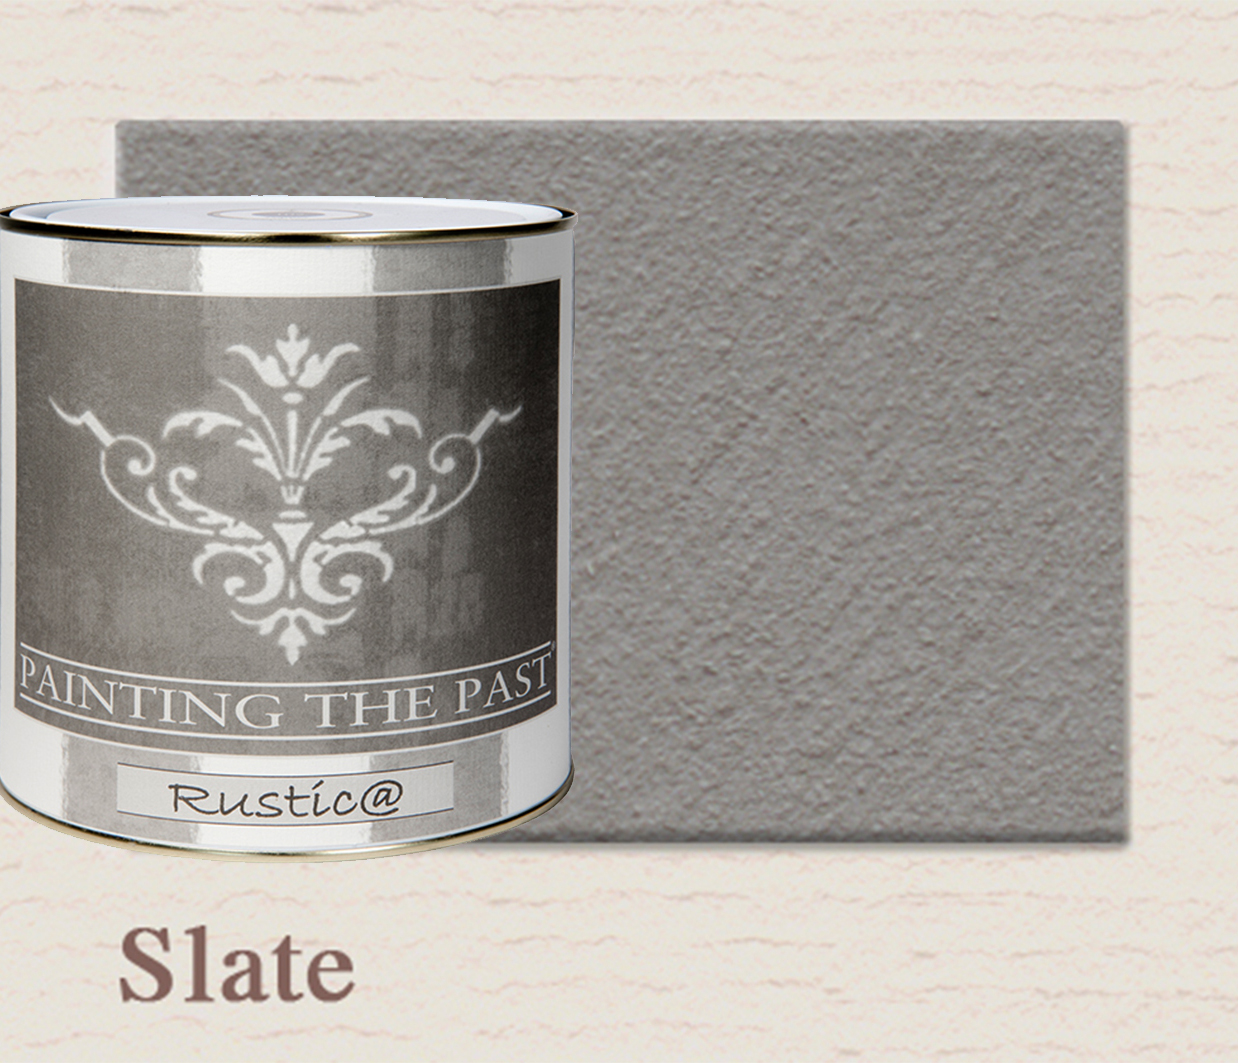 Painting The Past Rustica Slate